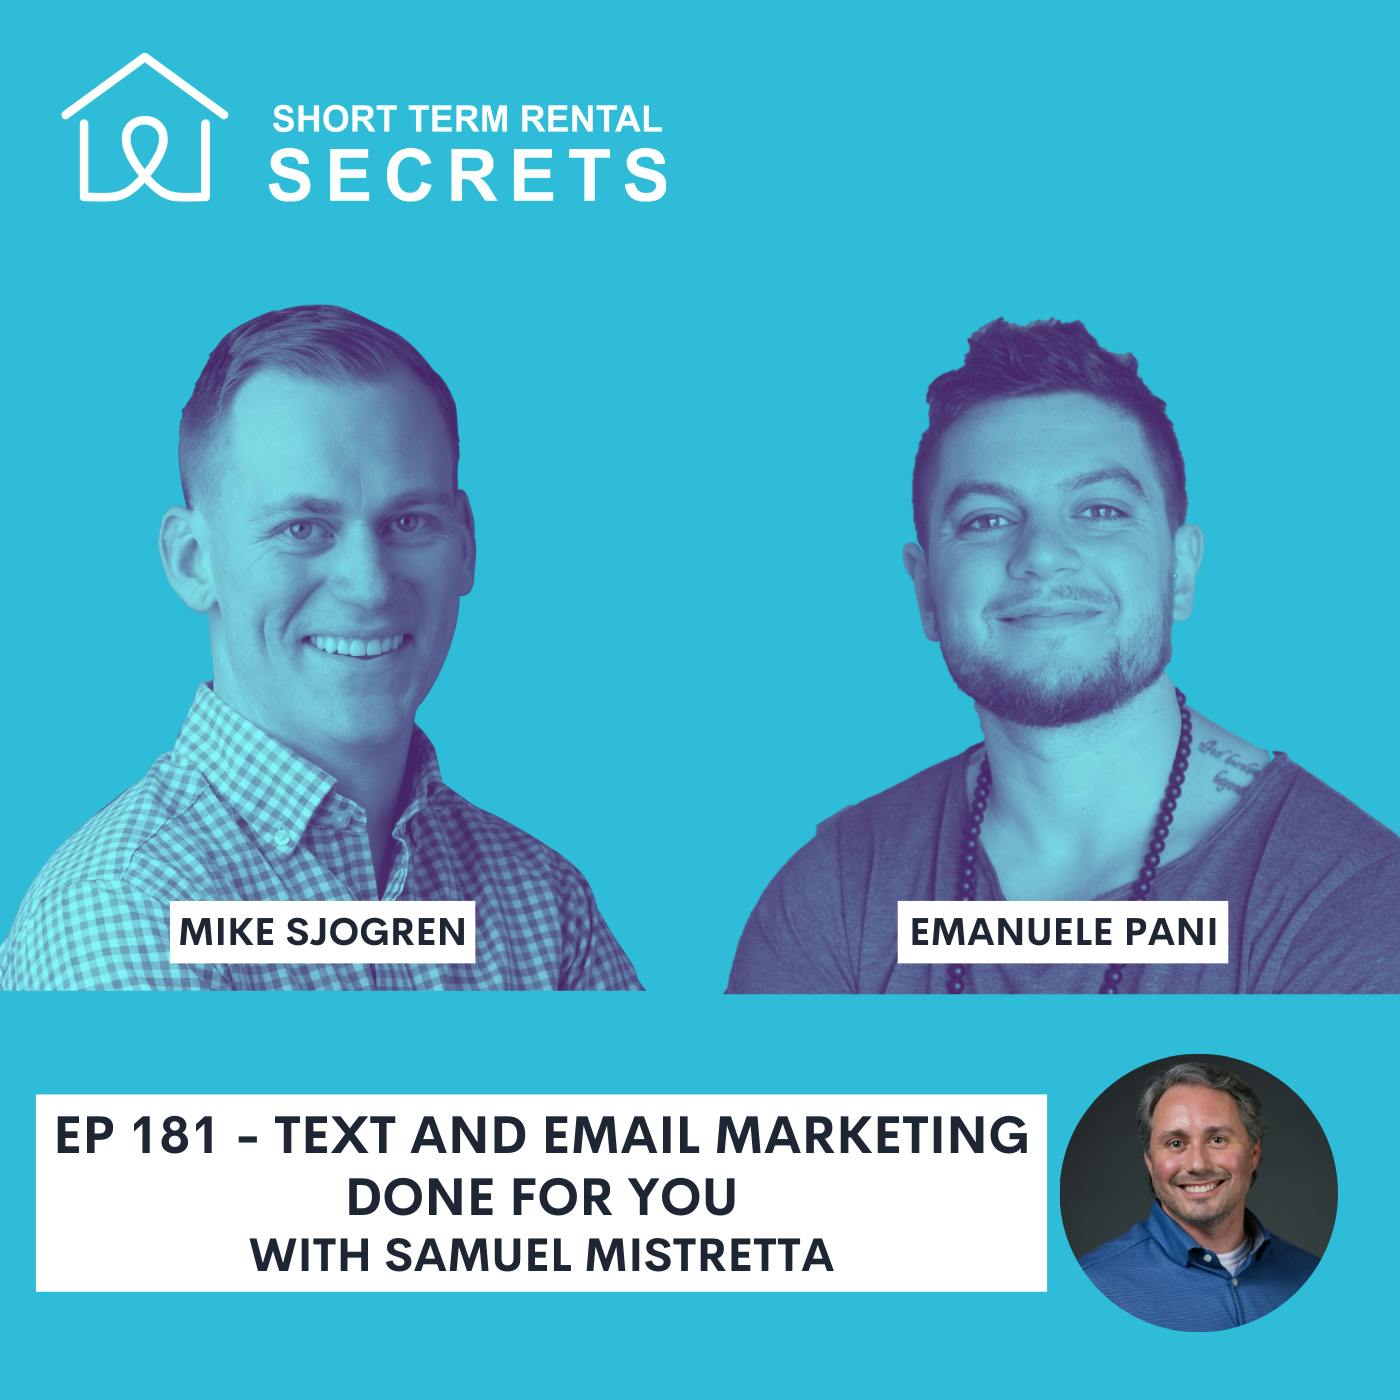 Ep 181 - Text and Email Marketing Done For You with Samuel Mistretta